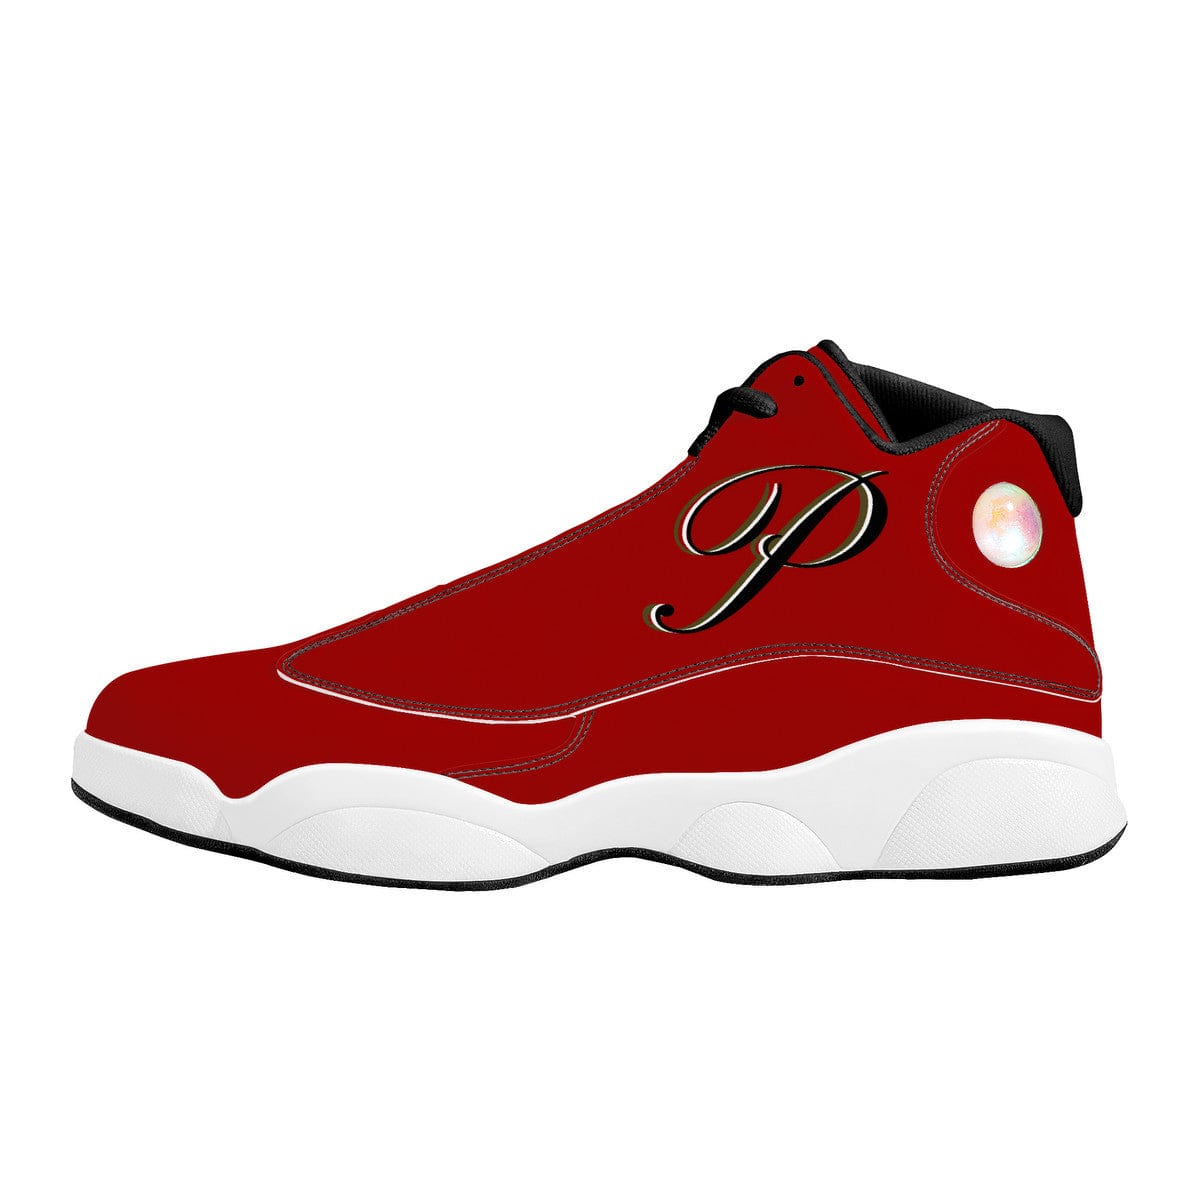 basketball shoes Phenomenal Royalty red shoes